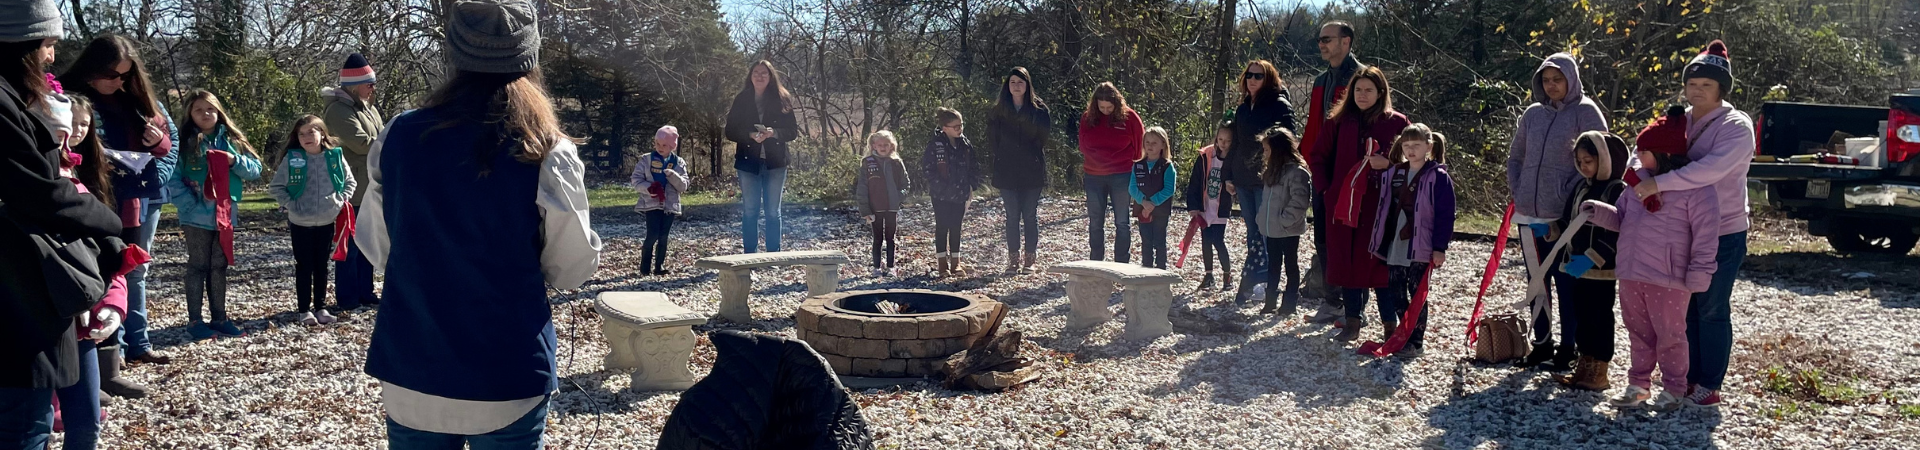  large group of girls and families gathered around a campfire 